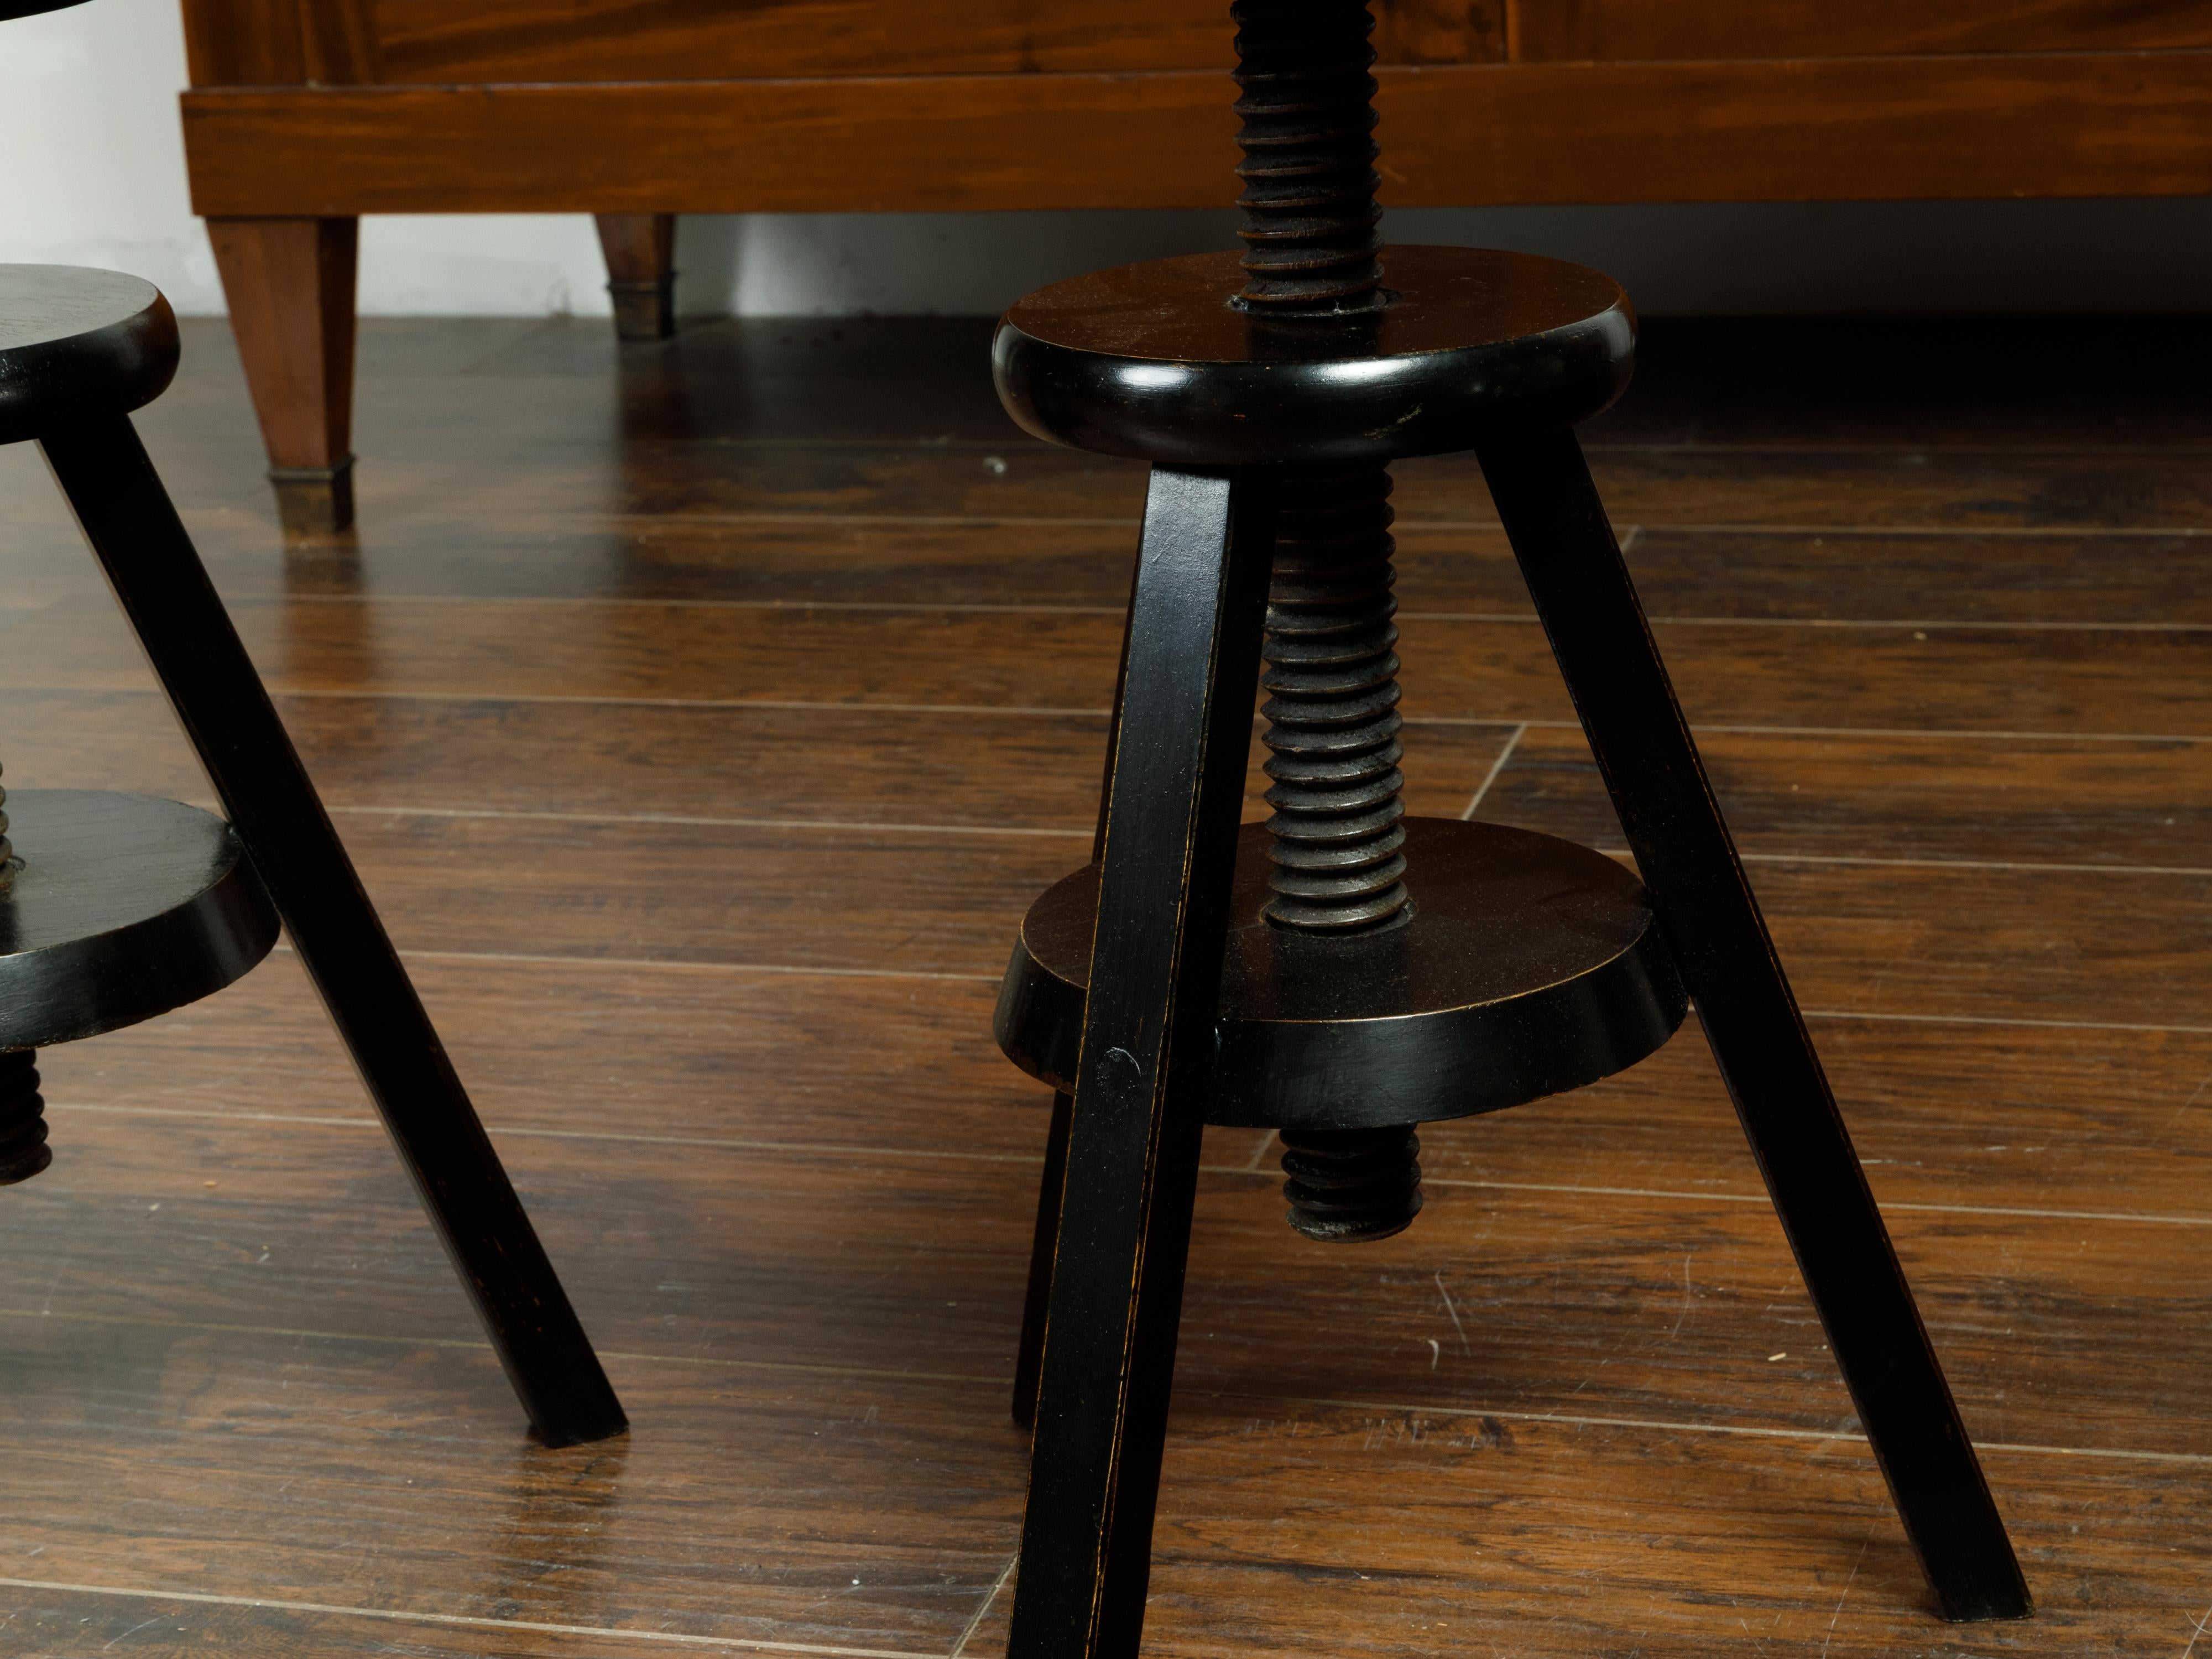 A pair of American adjustable artist's stools from the early 20th century, with black finish. Made in the USA during the first quarter of the 20th century, each of this pair of stools features a circular top resting on an adjustable base raised on